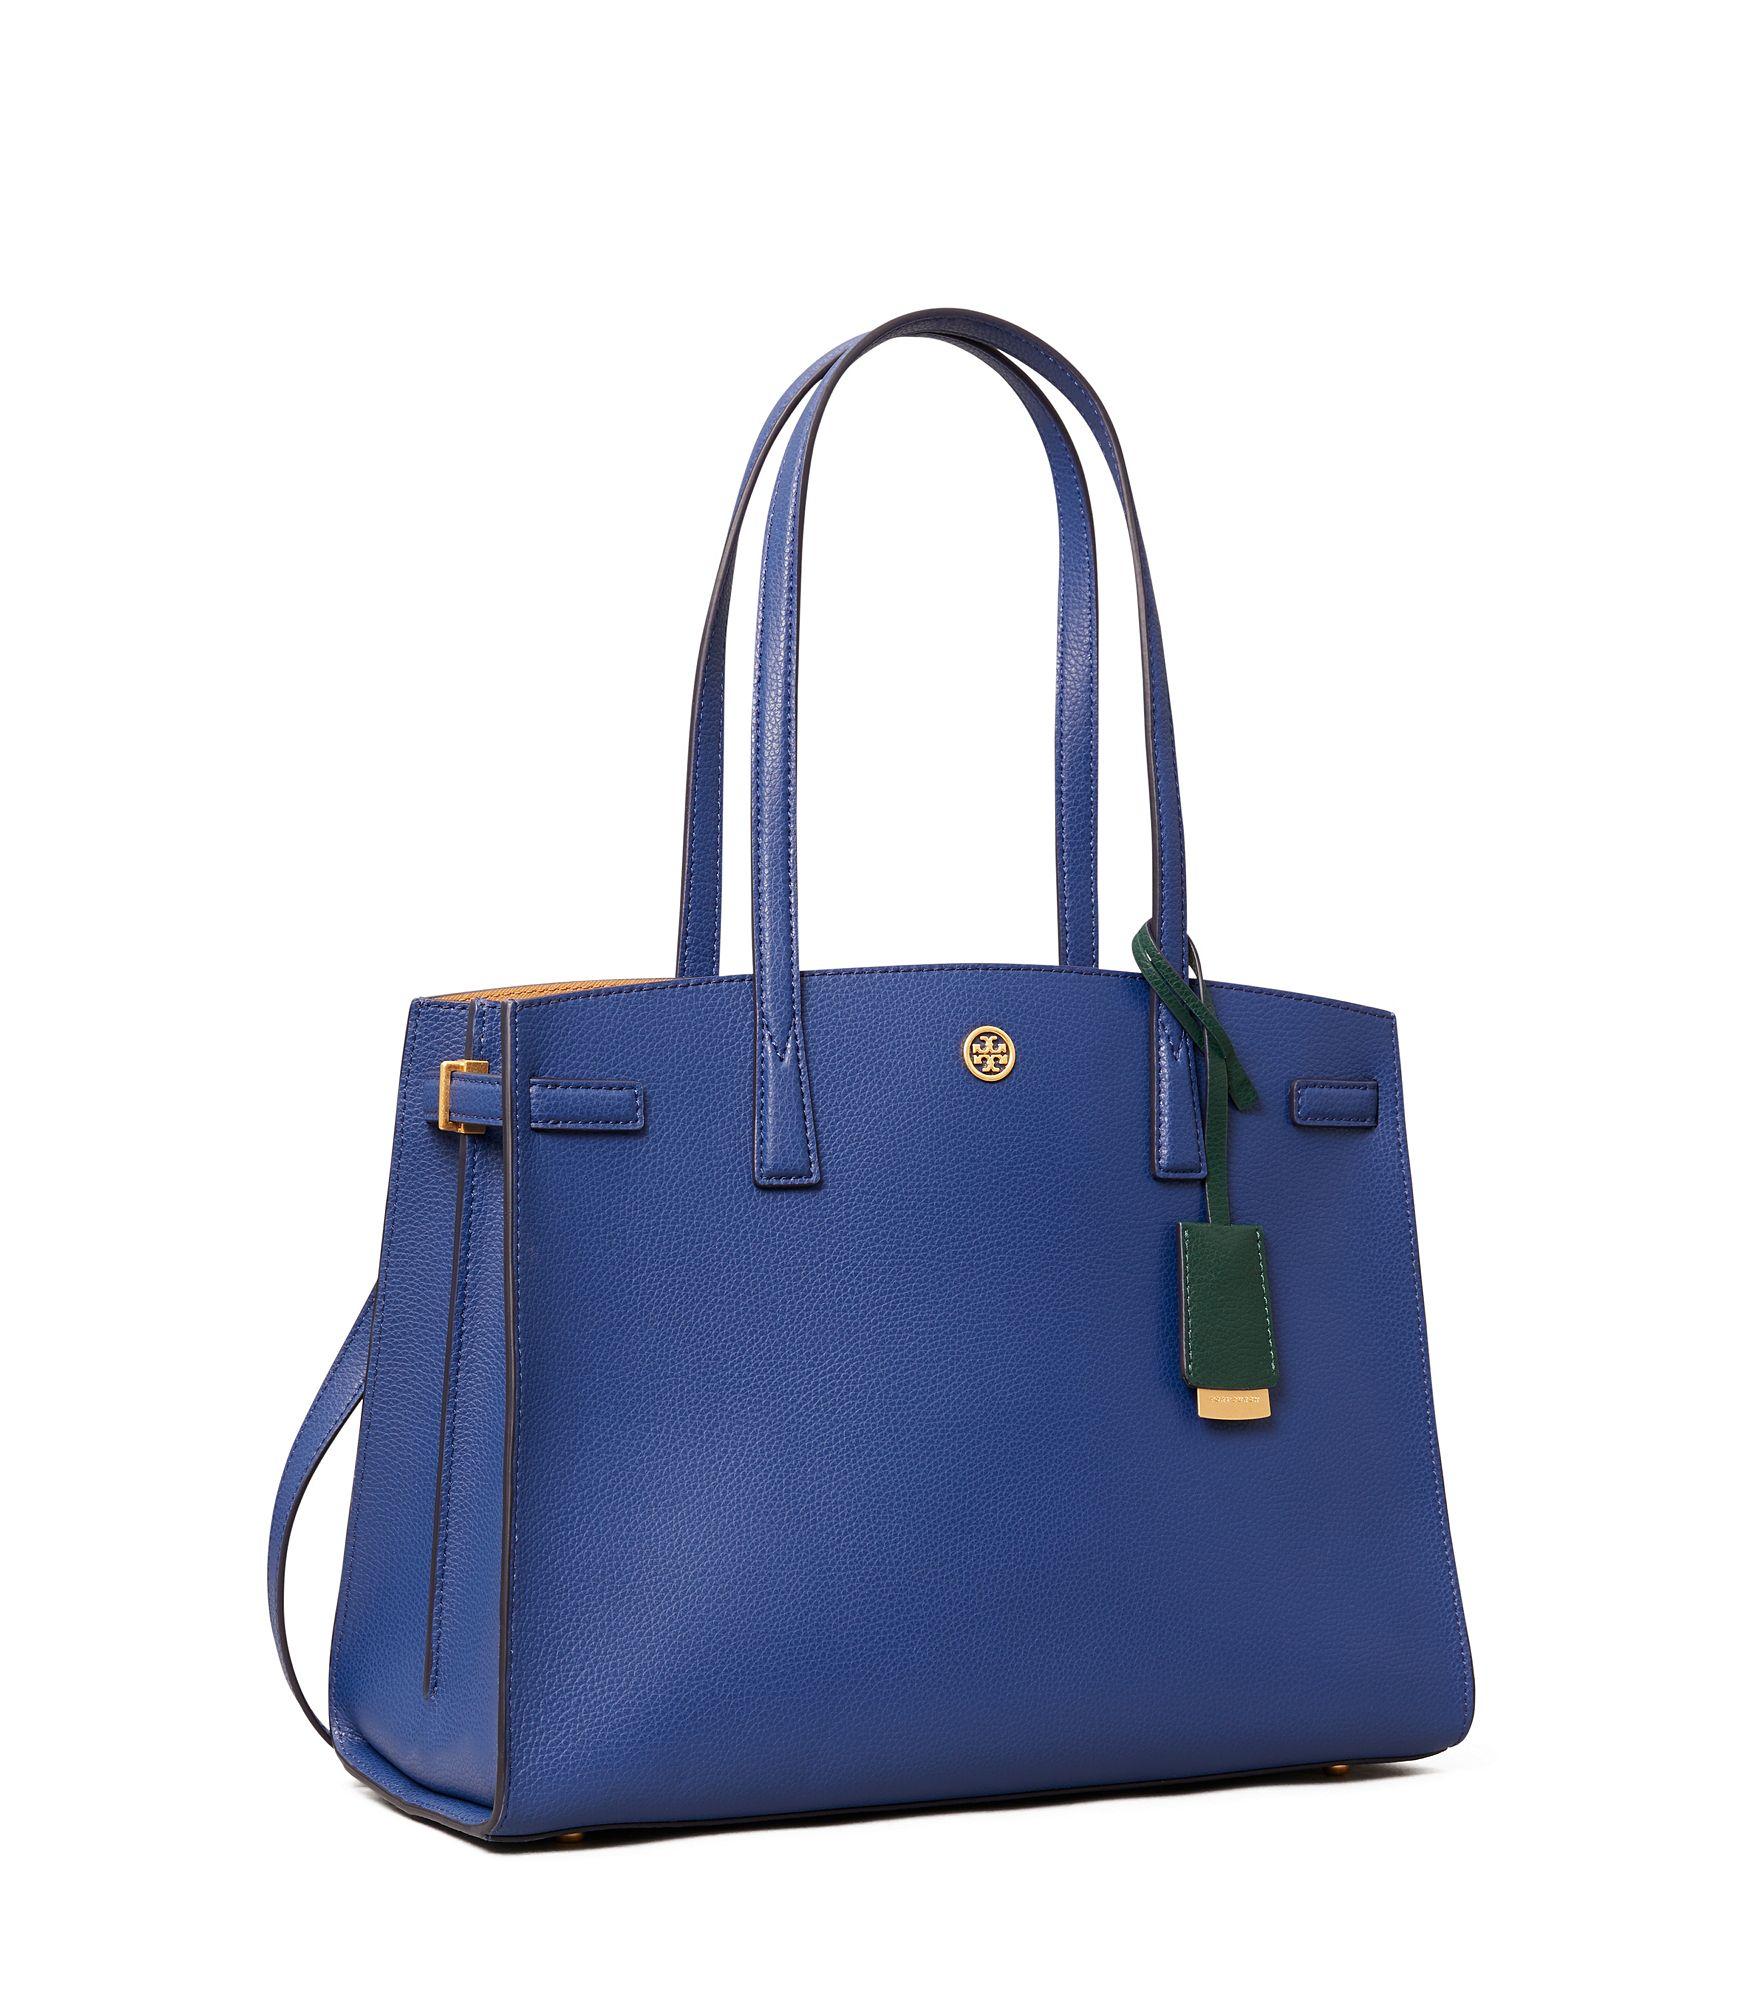 Tory Burch Small Robinson Perforated Tote Bag - Farfetch